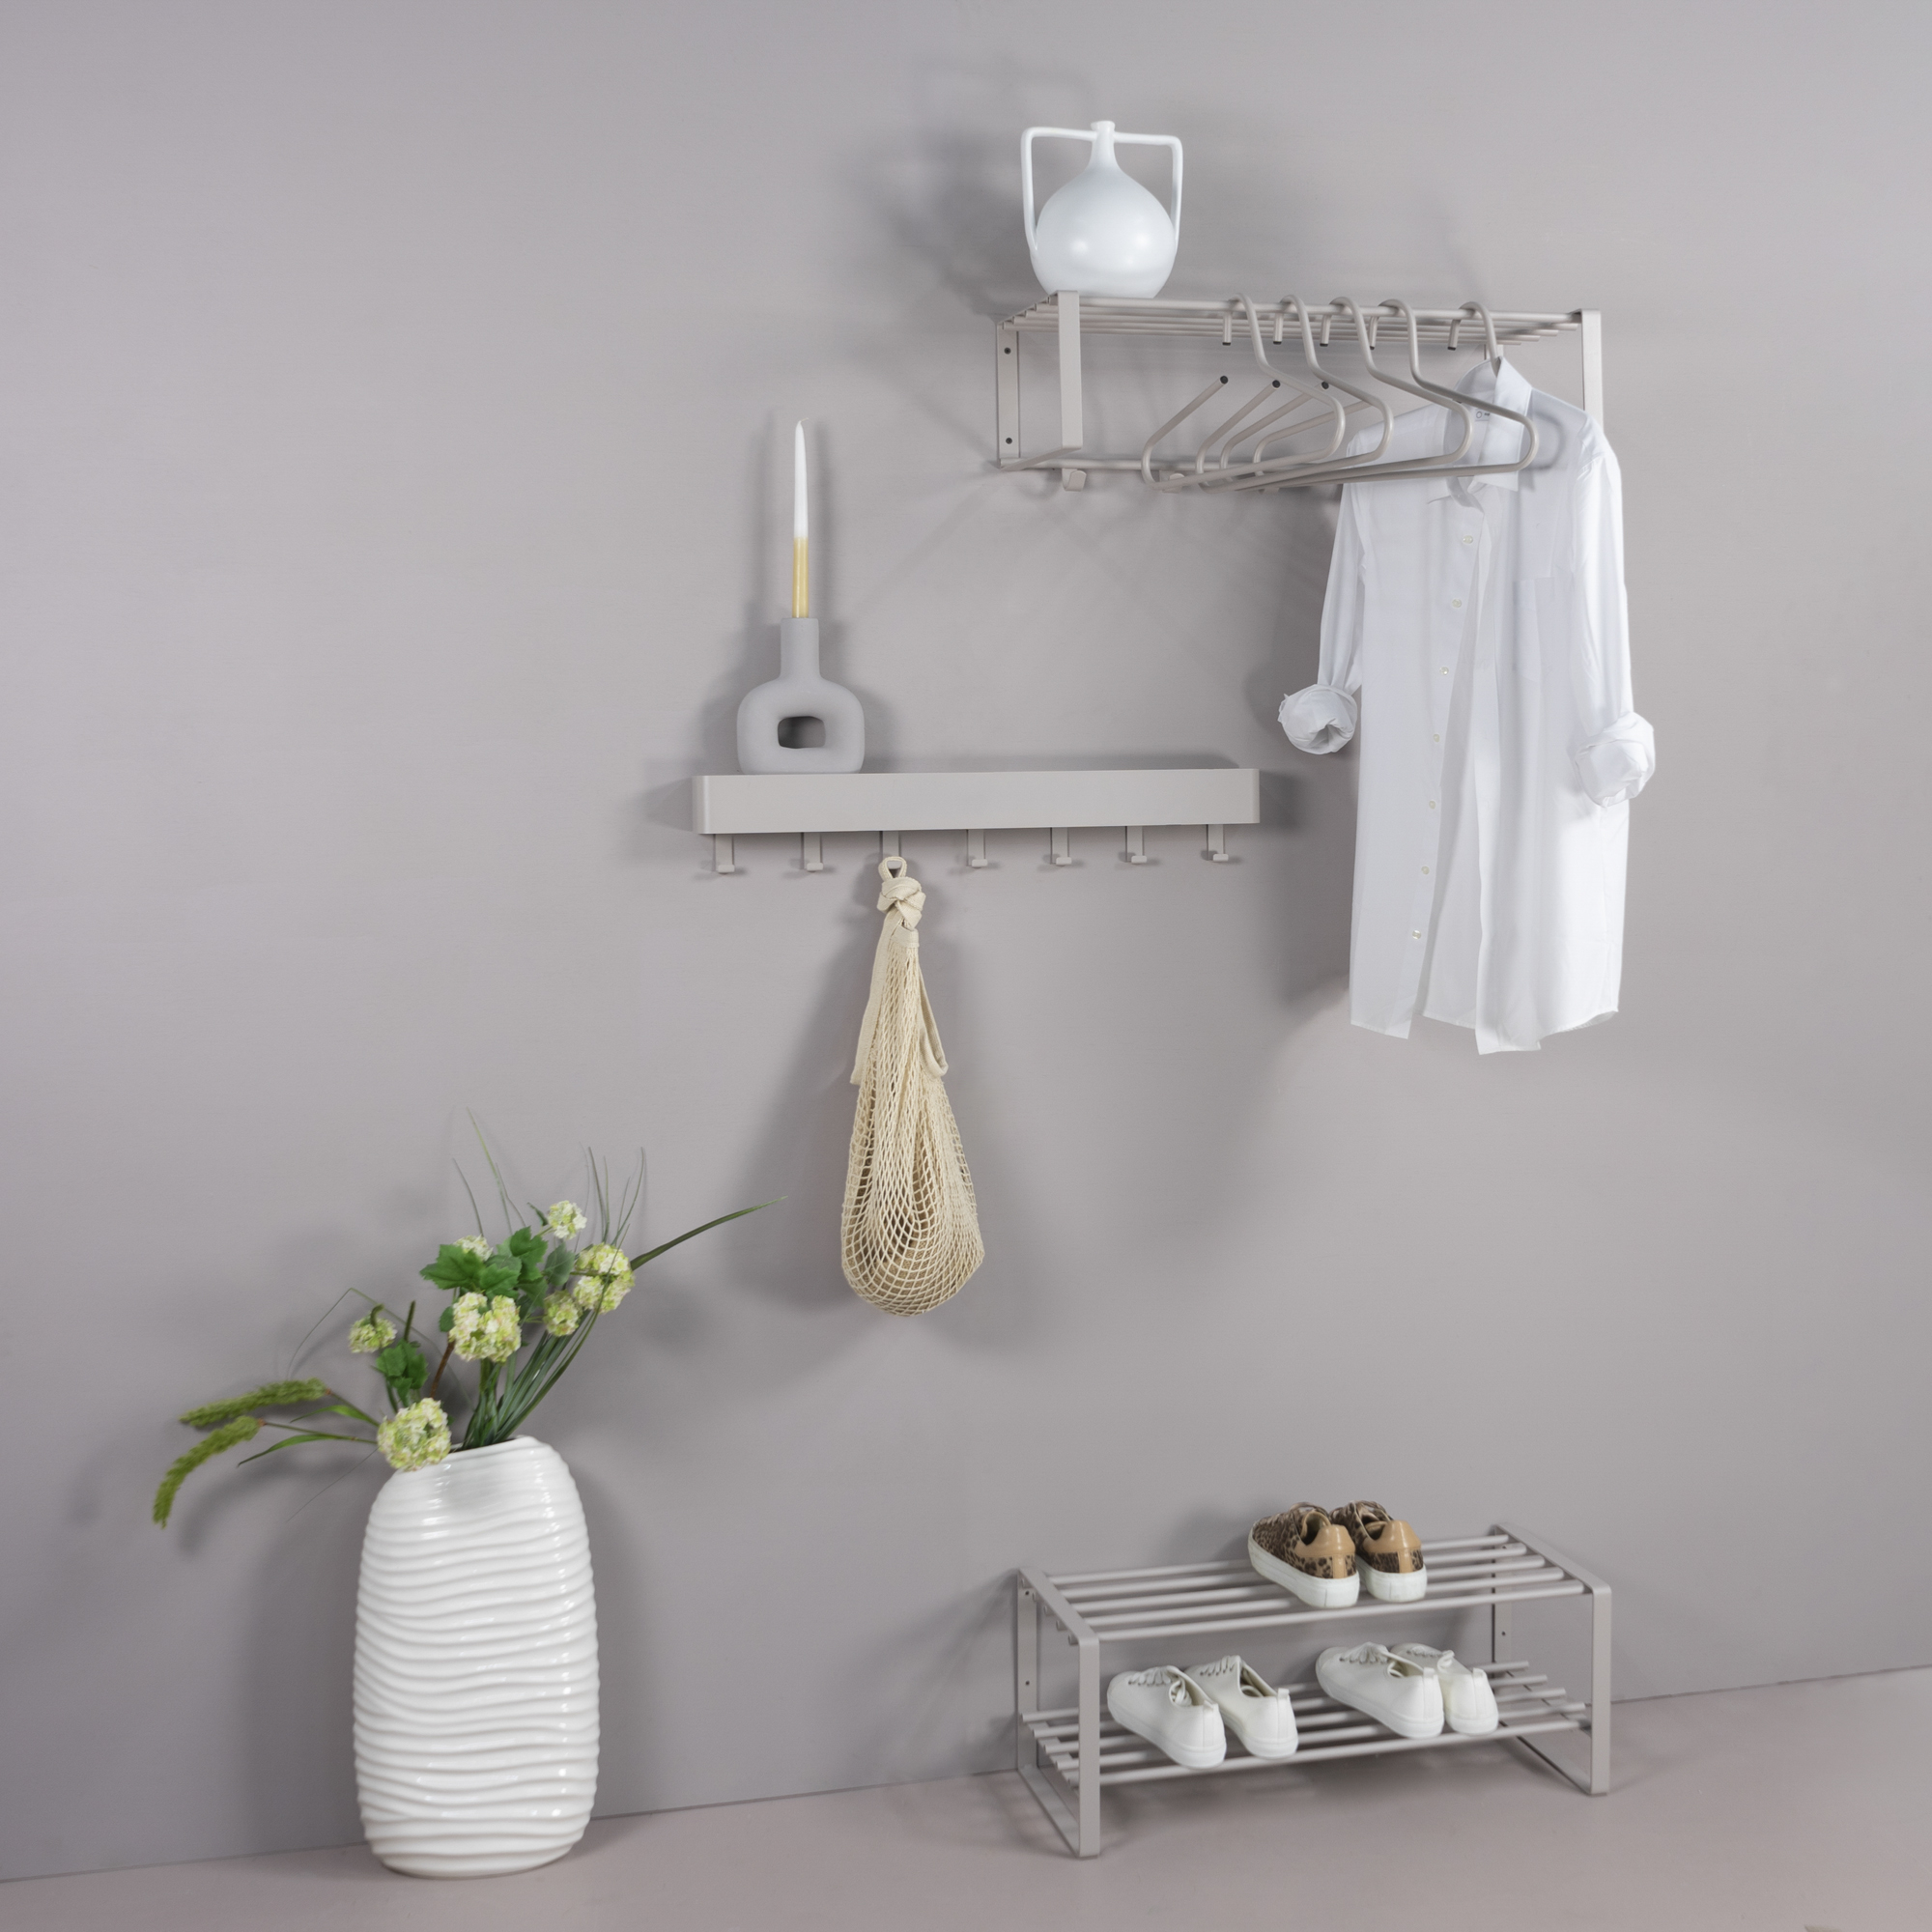 Selection guide: which coat rack to choose?